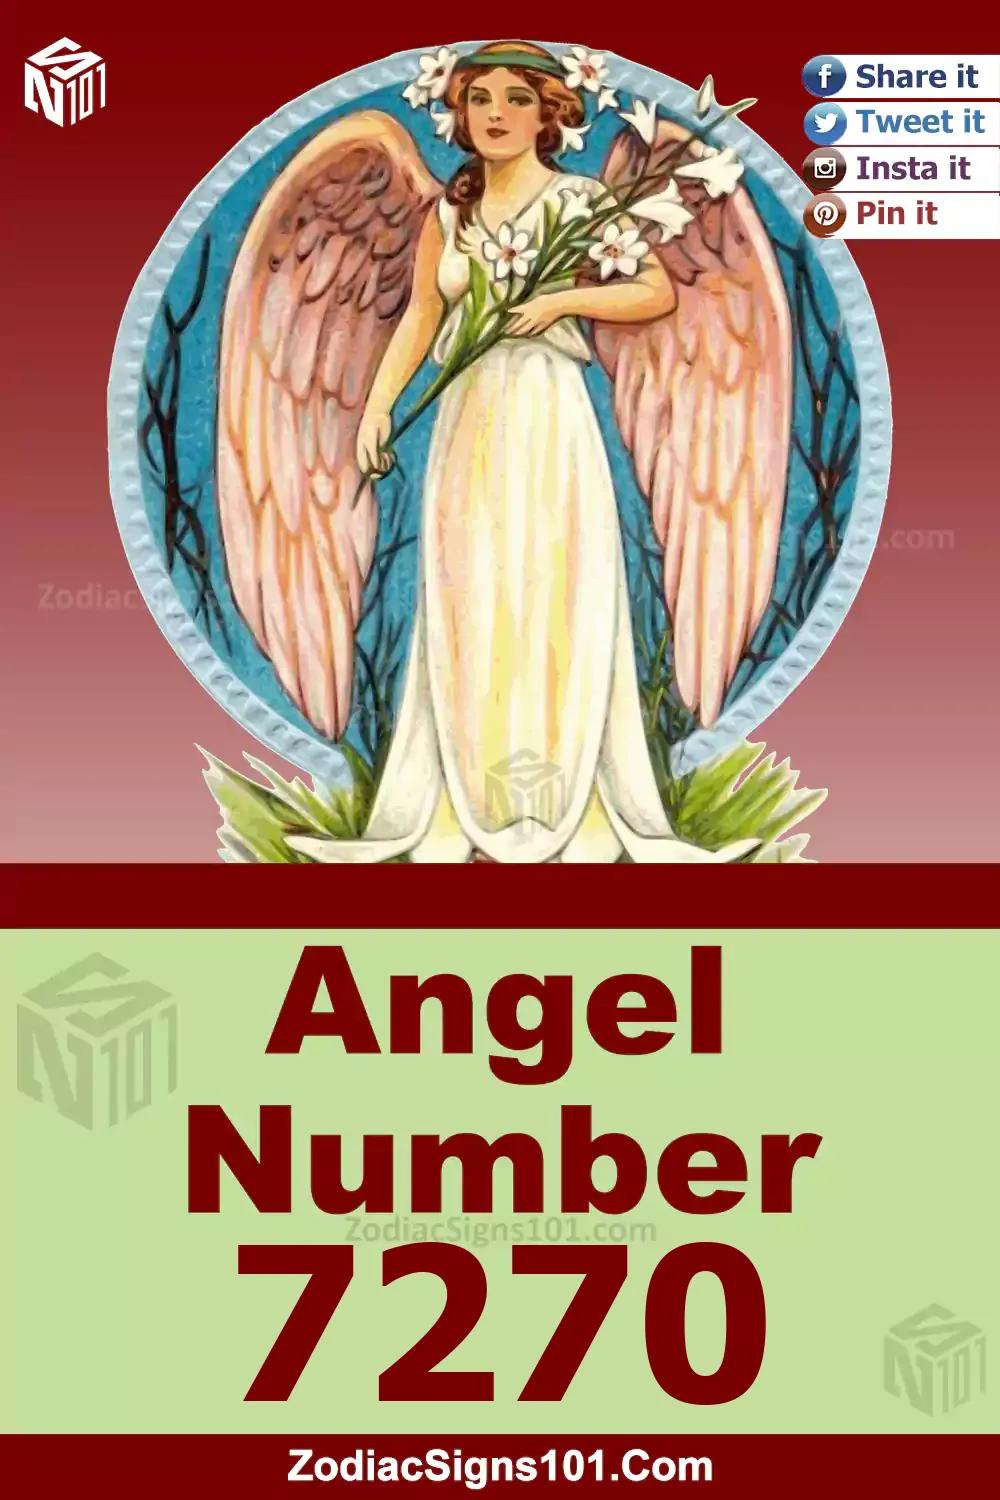 7270 Angel Number Meaning